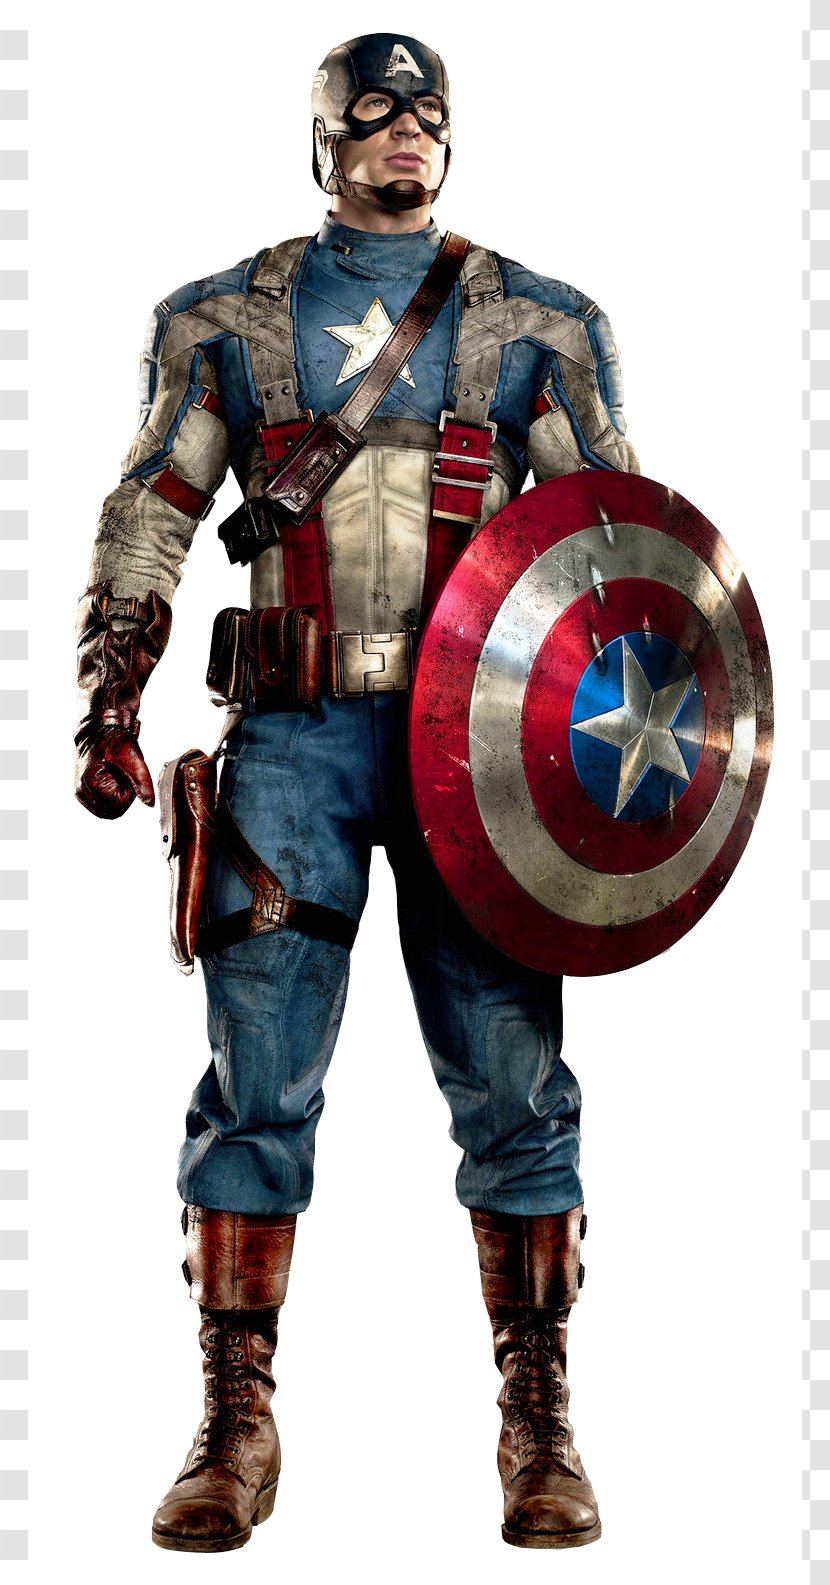 Captain America Bucky Barnes Costume Marvel Cinematic Universe Film - The Winter Soldier Transparent PNG